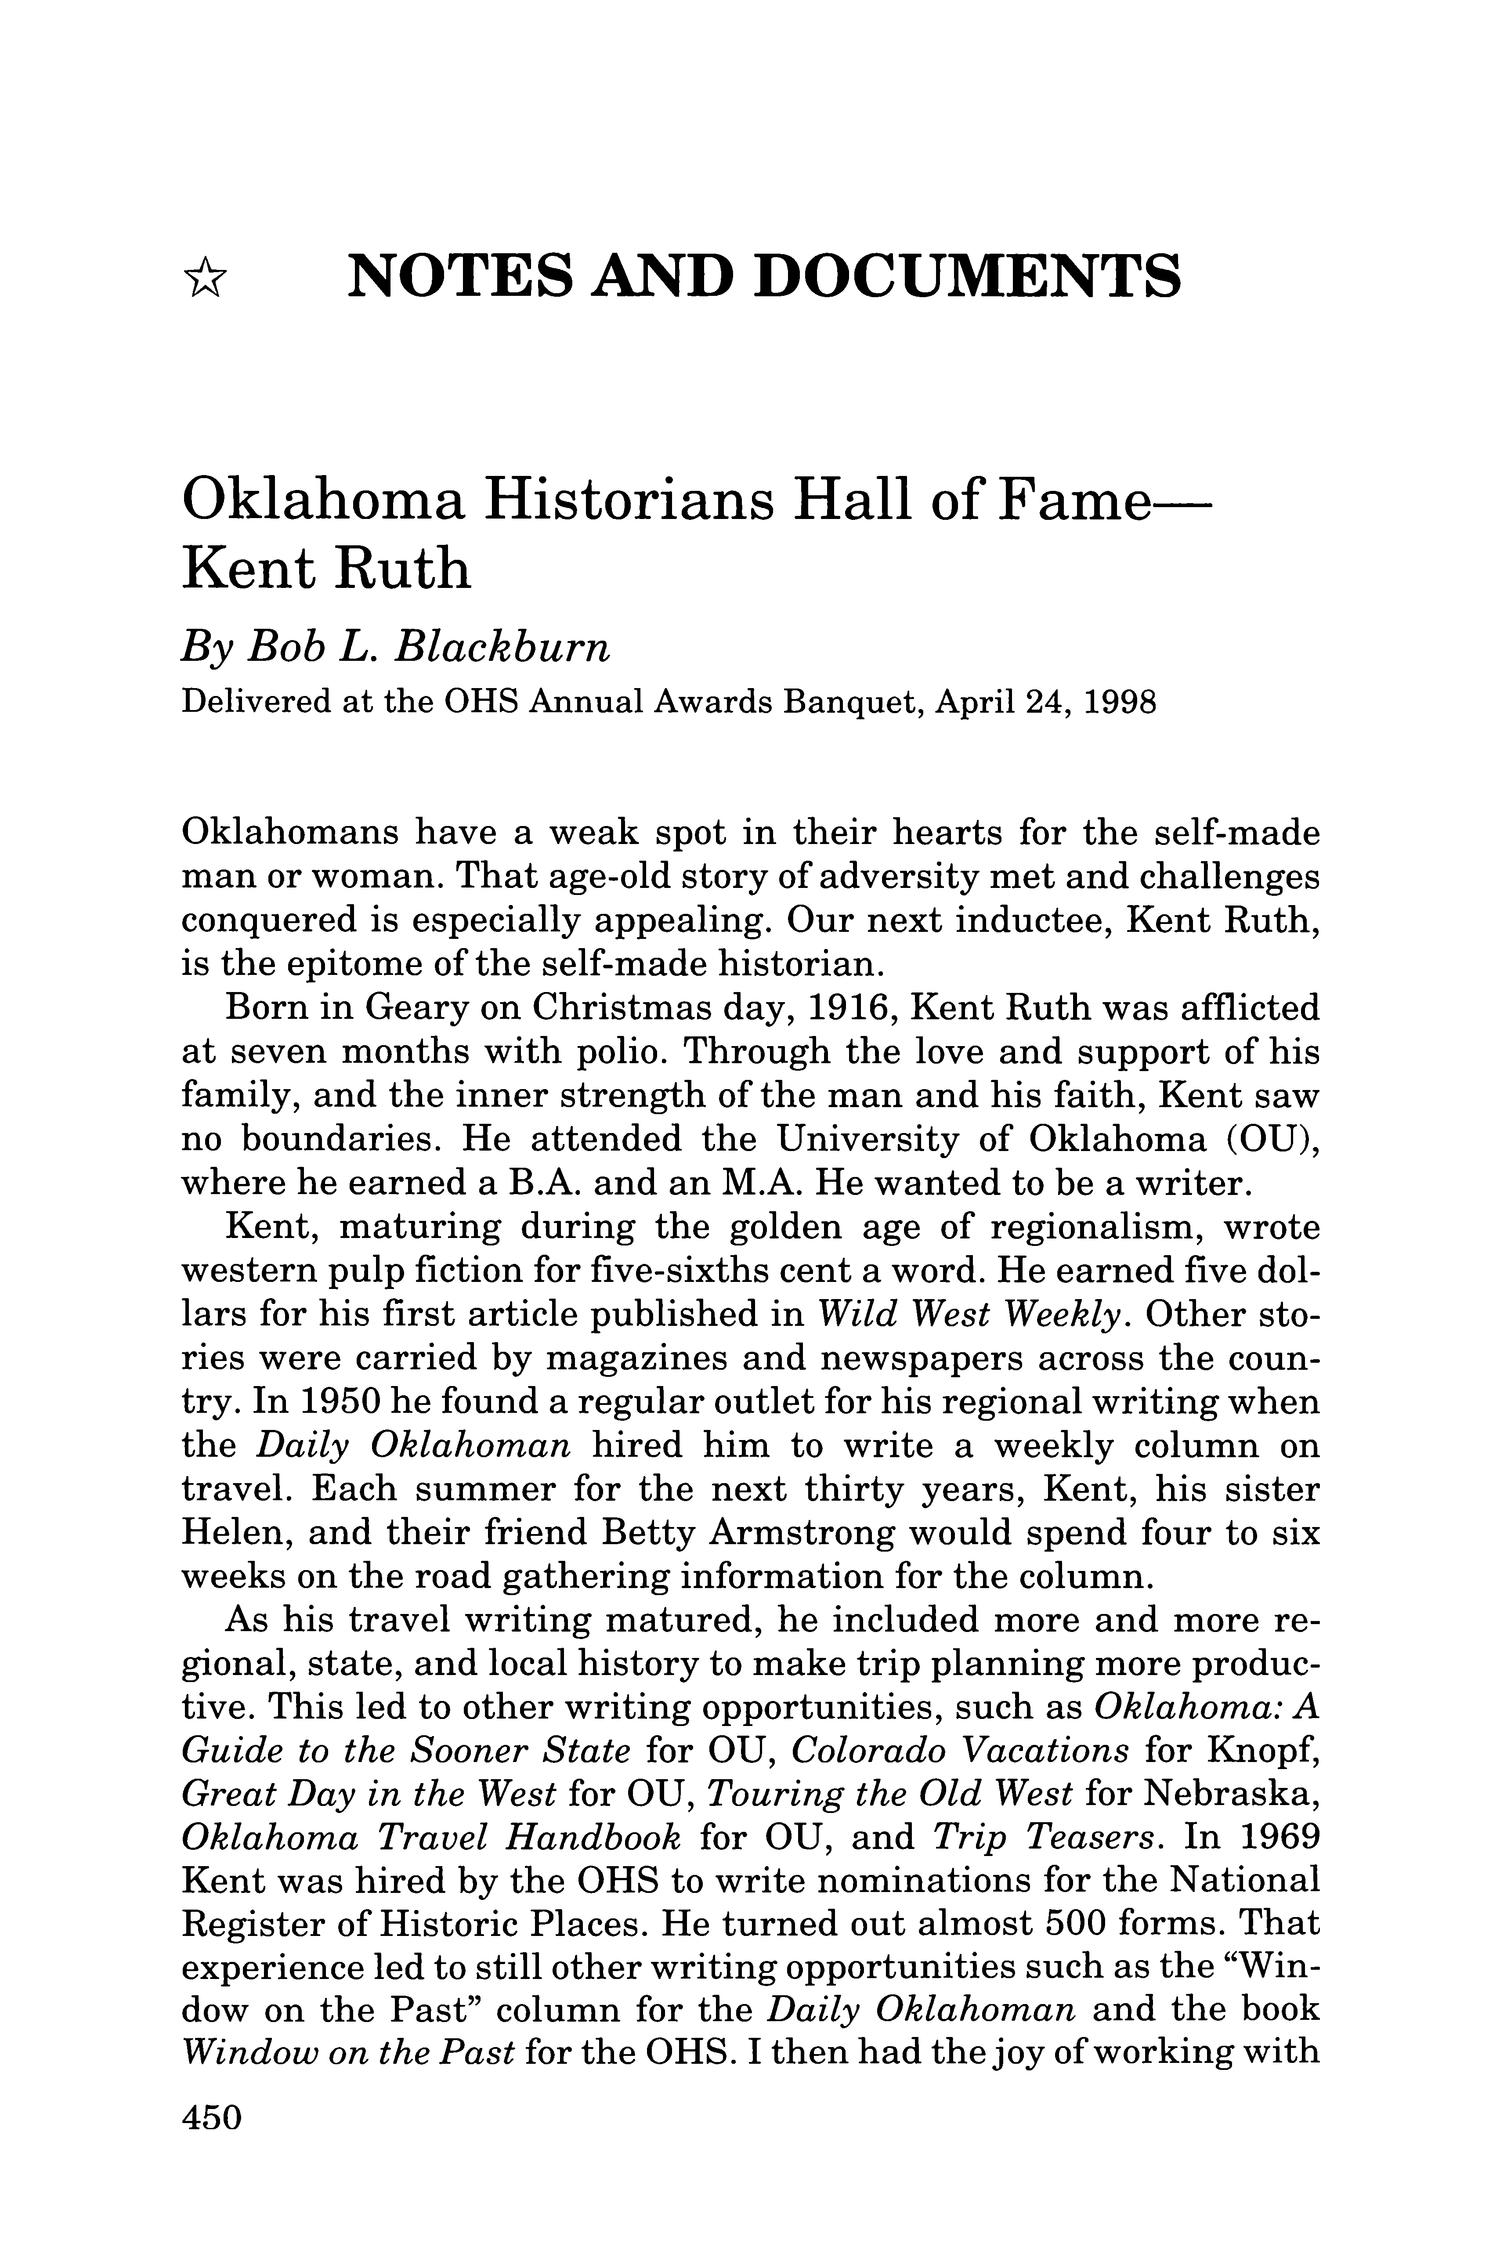 Chronicles of Oklahoma, Volume 76, Number 4, Winter 1998-99
                                                
                                                    450
                                                